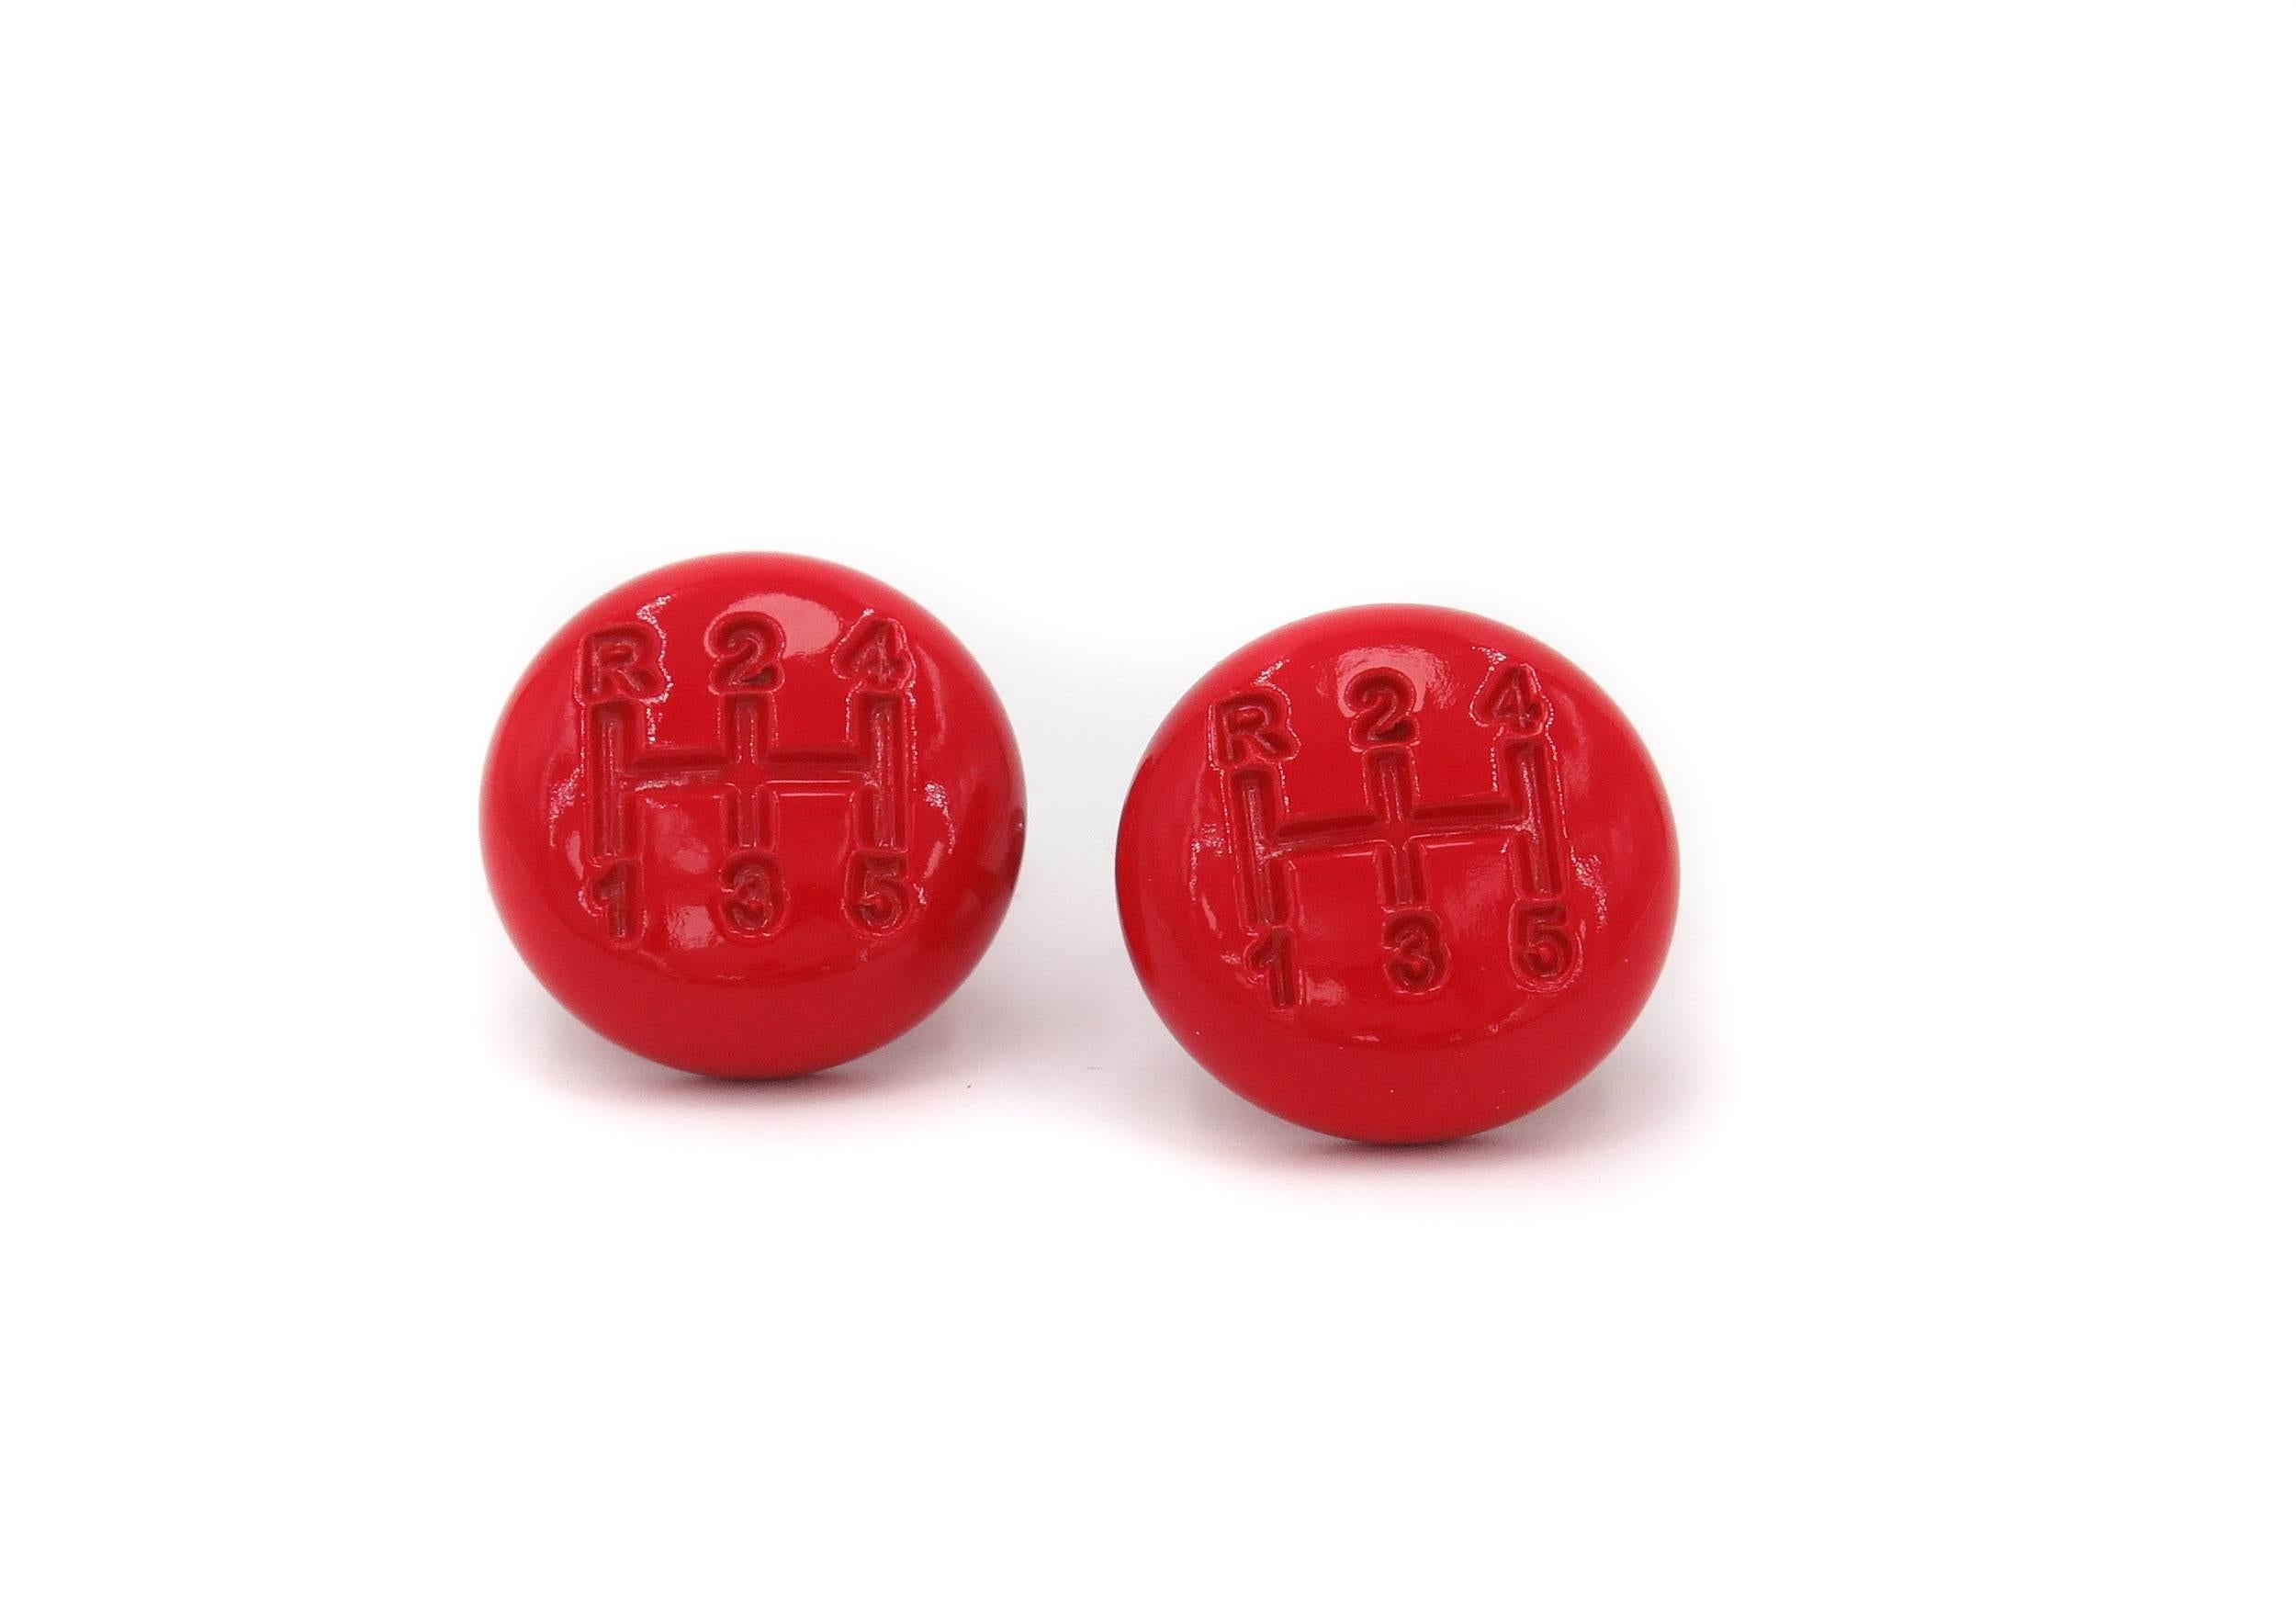 These Shift Knob cufflinks in red lacquered stainless steel are a discreet nod to the world of car racing. Their glossy red color and finely curved proportions make them a stylish and vibrant addition to shirt cuffs, with the gear-stick design